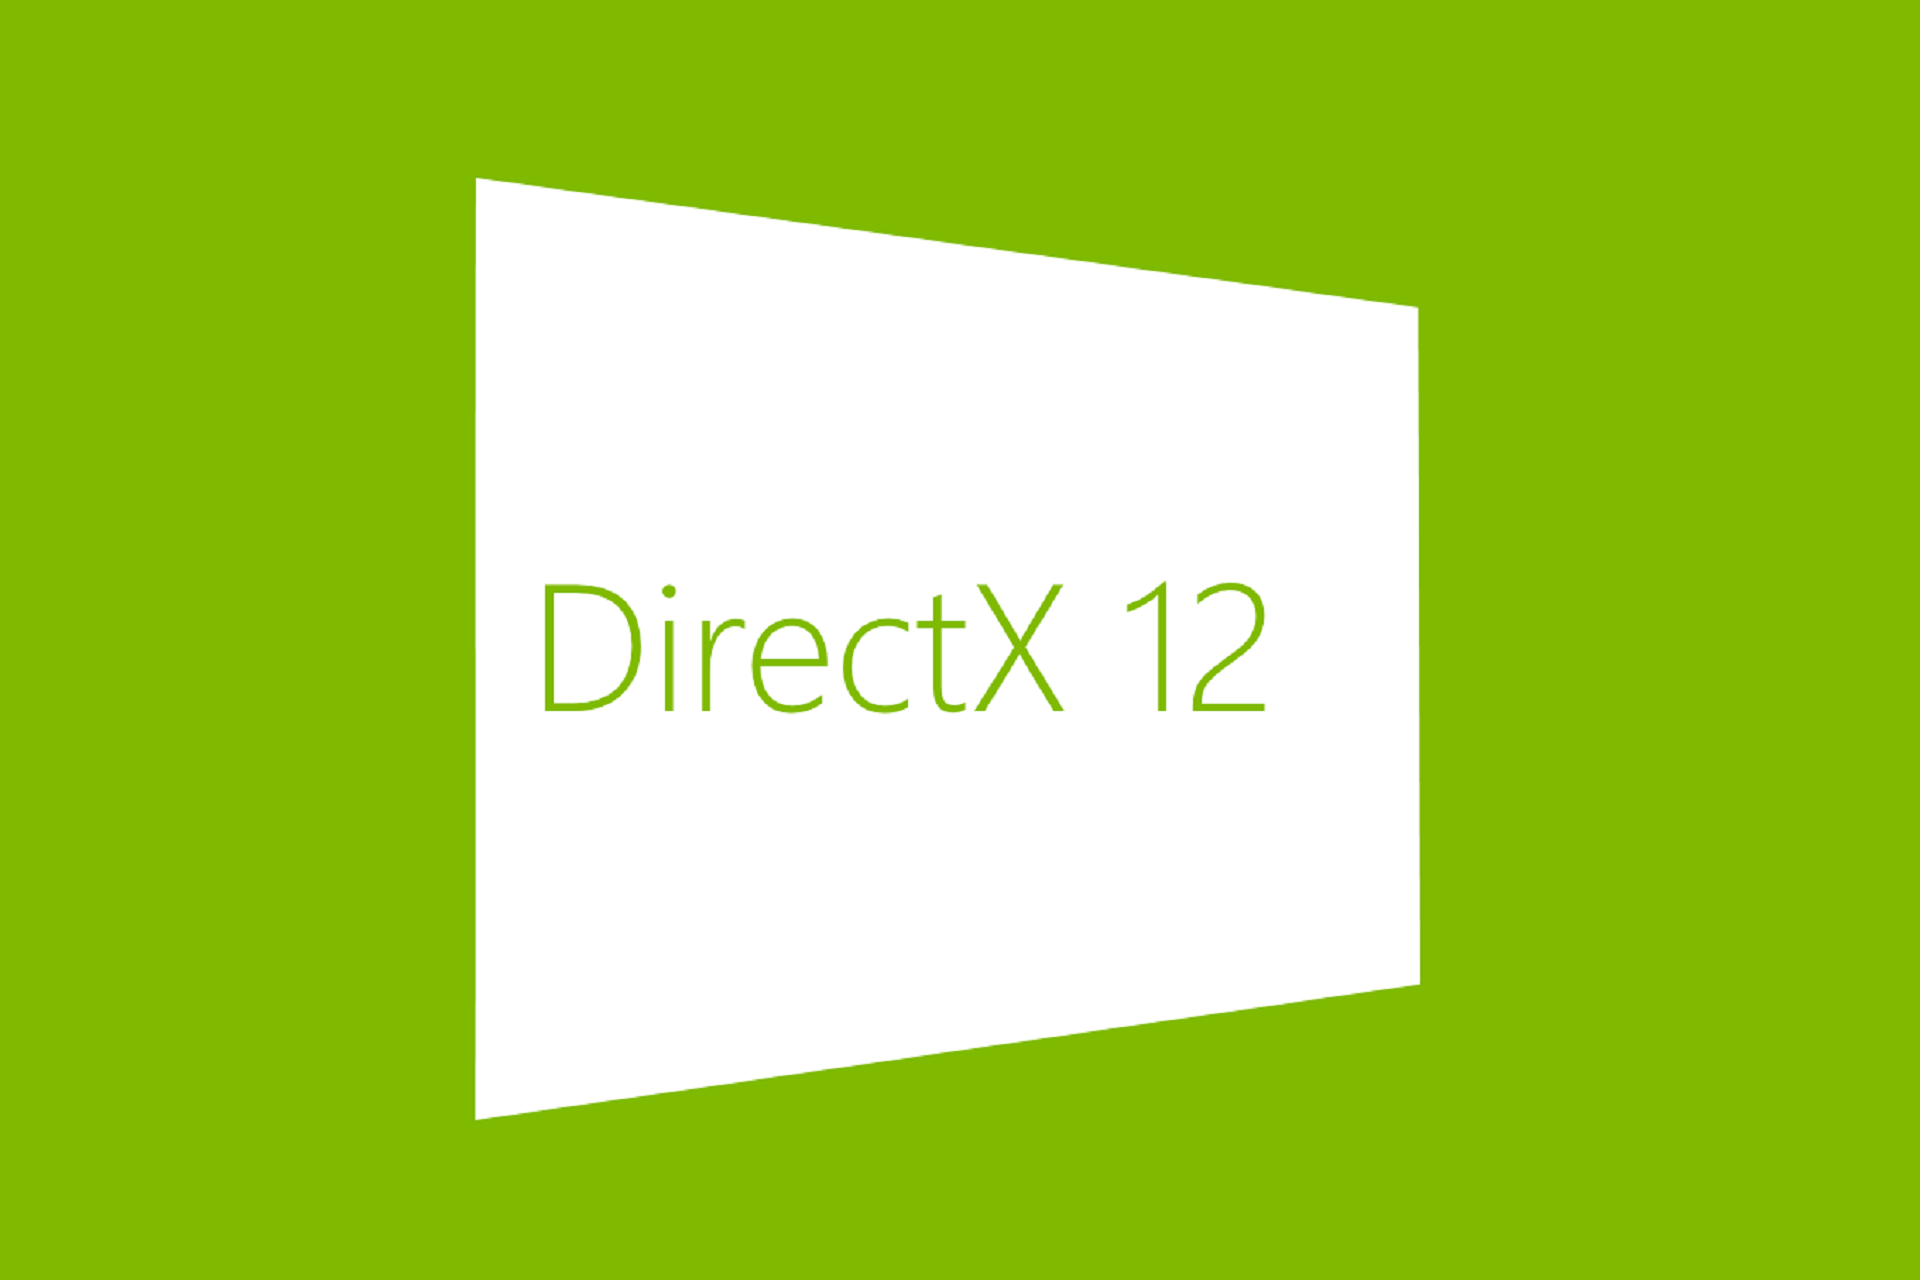 download directx runtime for windows 7